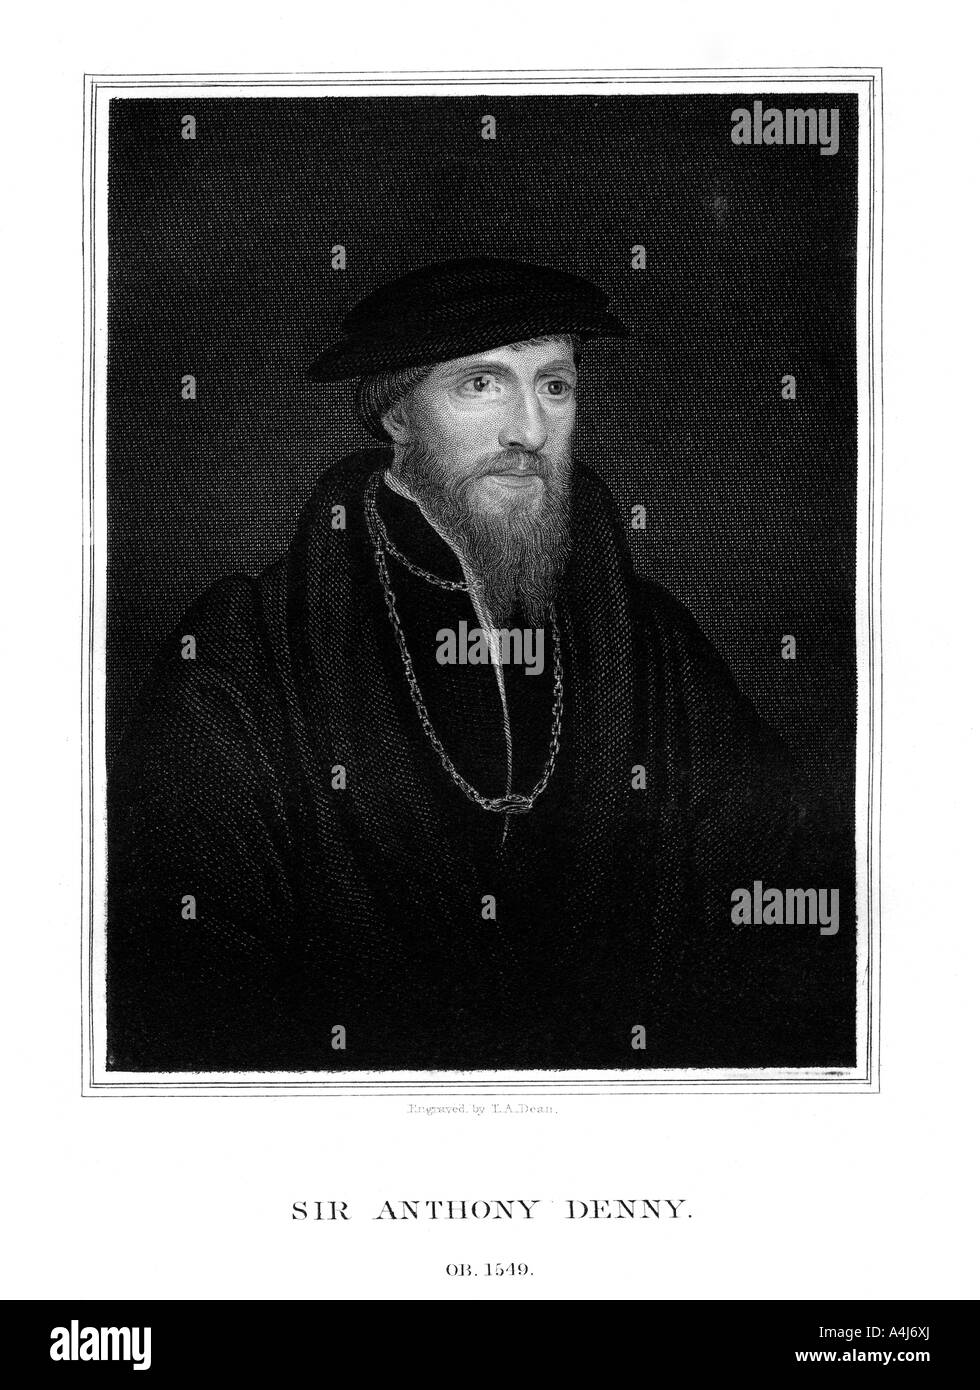 Sir Anthony Denny, courtier of Henry VIII, (1827).Artist: TA Dean Stock Photo